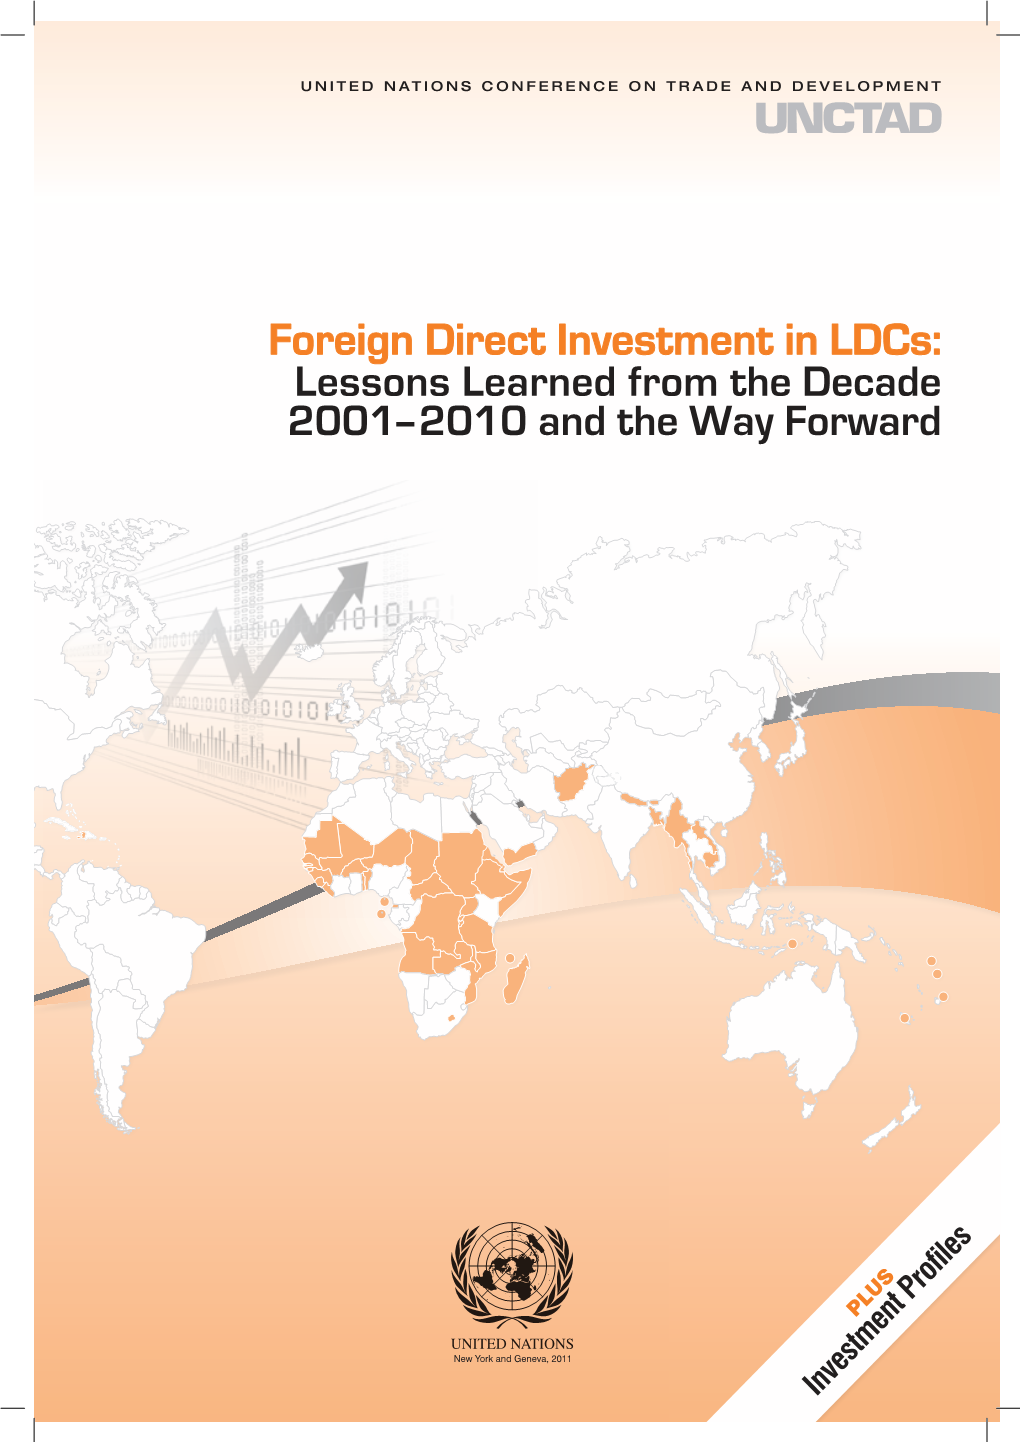 Foreign Direct Investment in Ldcs: Lessons Learned from the Decade 2001-2010 and the Way Forward